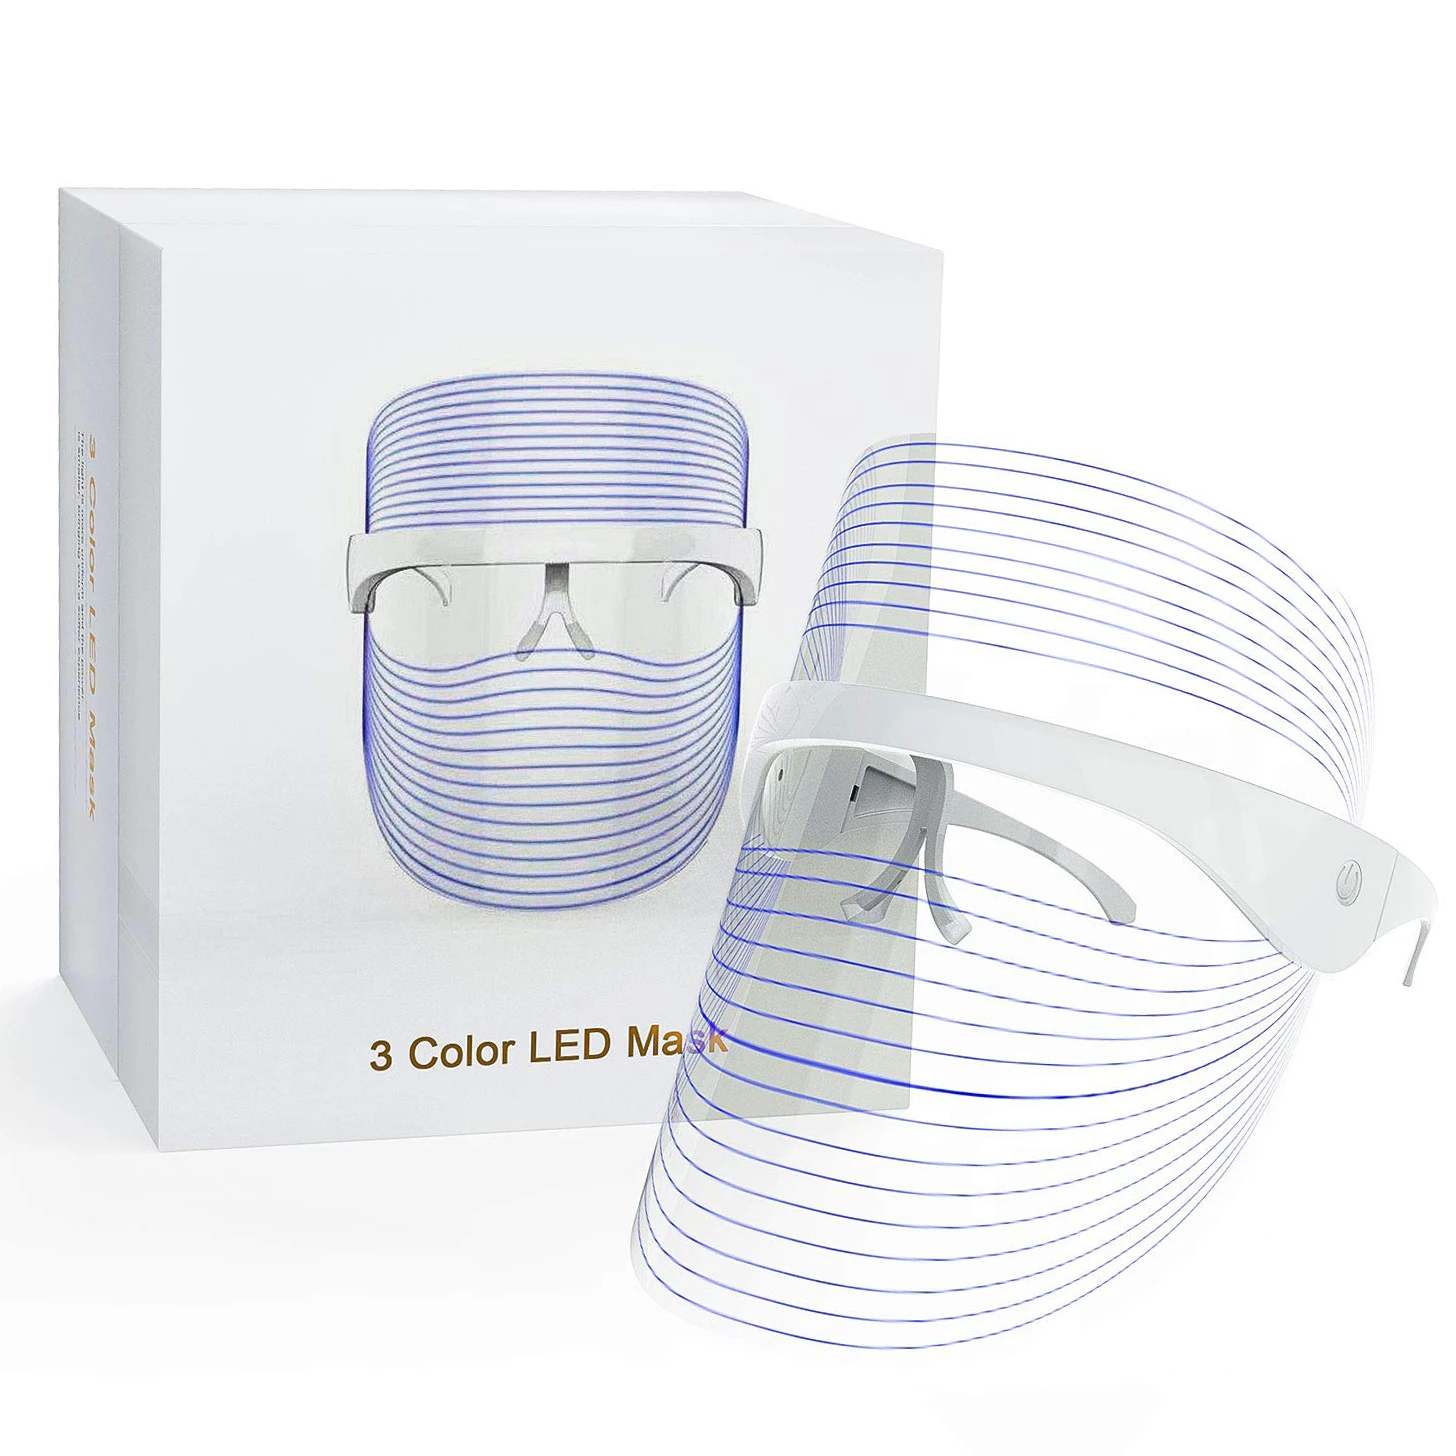 

Amazon Beauty Equipt Facial Rejuvenation Photon Device Wrinkles Reduction Anti-Aging 3 Colors LED Light Therapy Face Mask